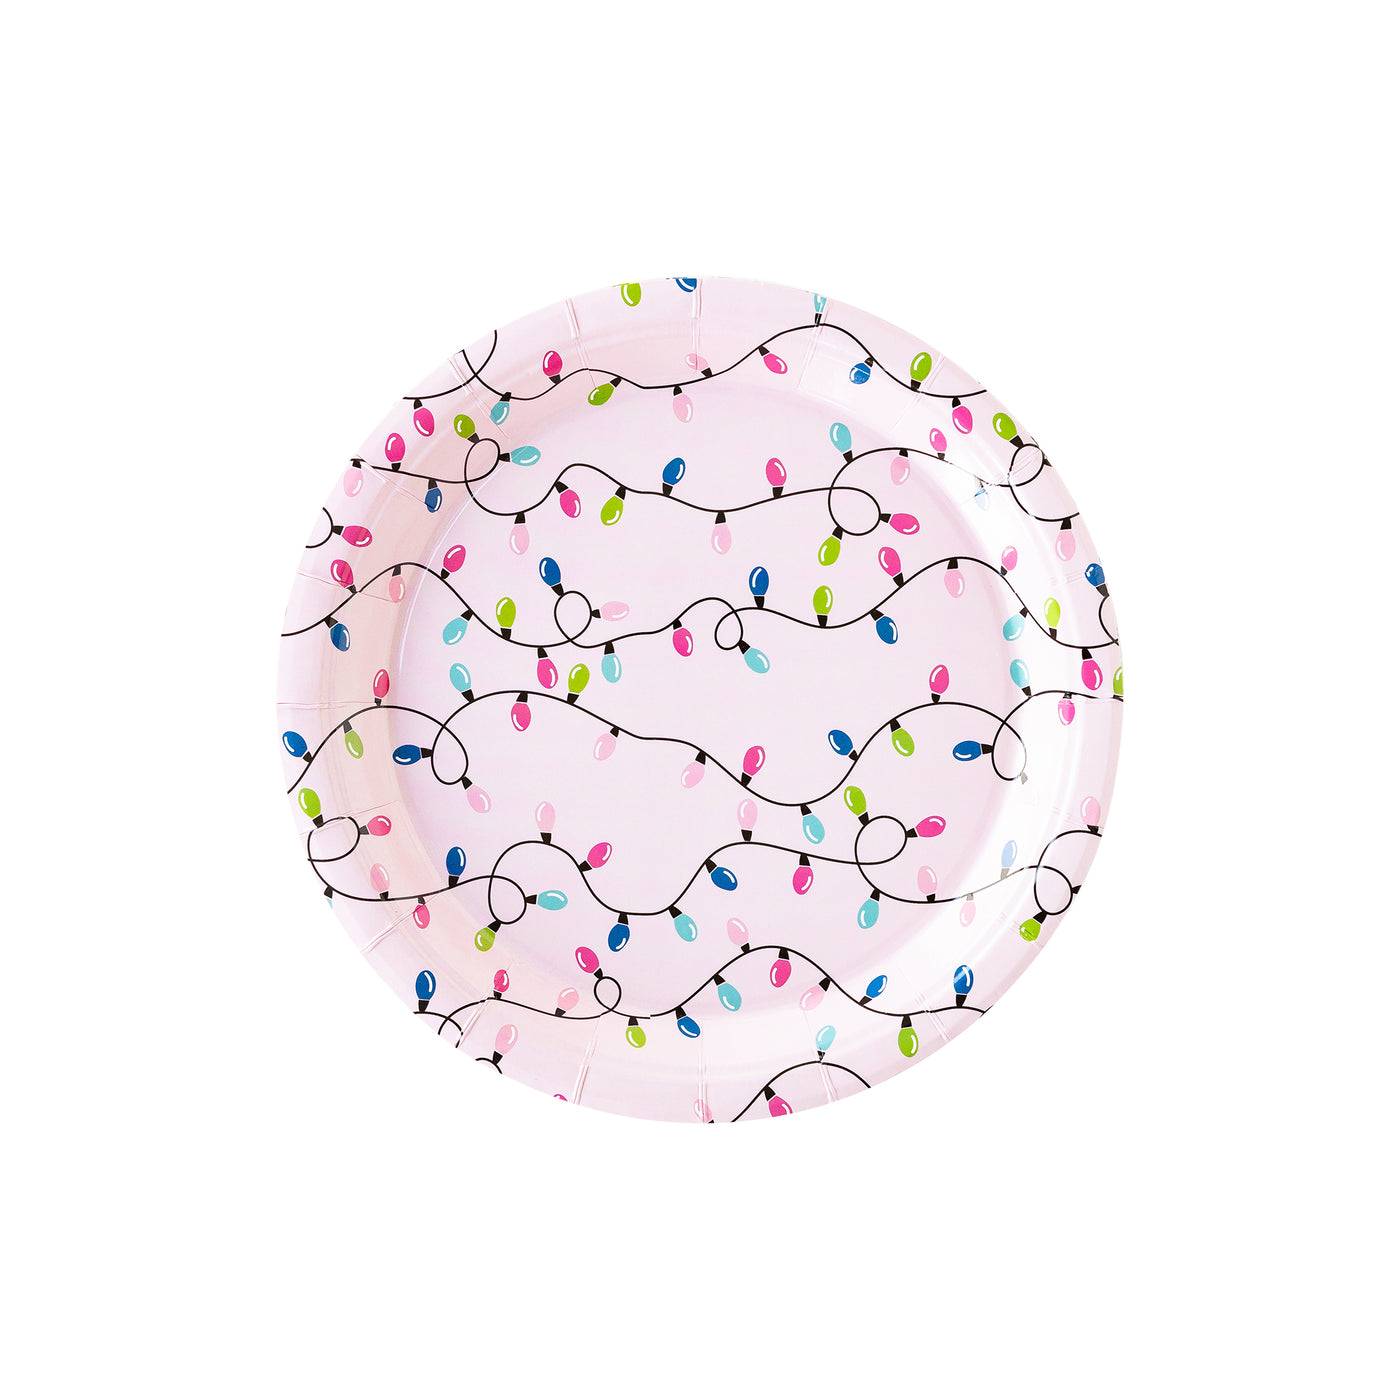 PLTS393i - Bright Christmas Lights Paper Plate